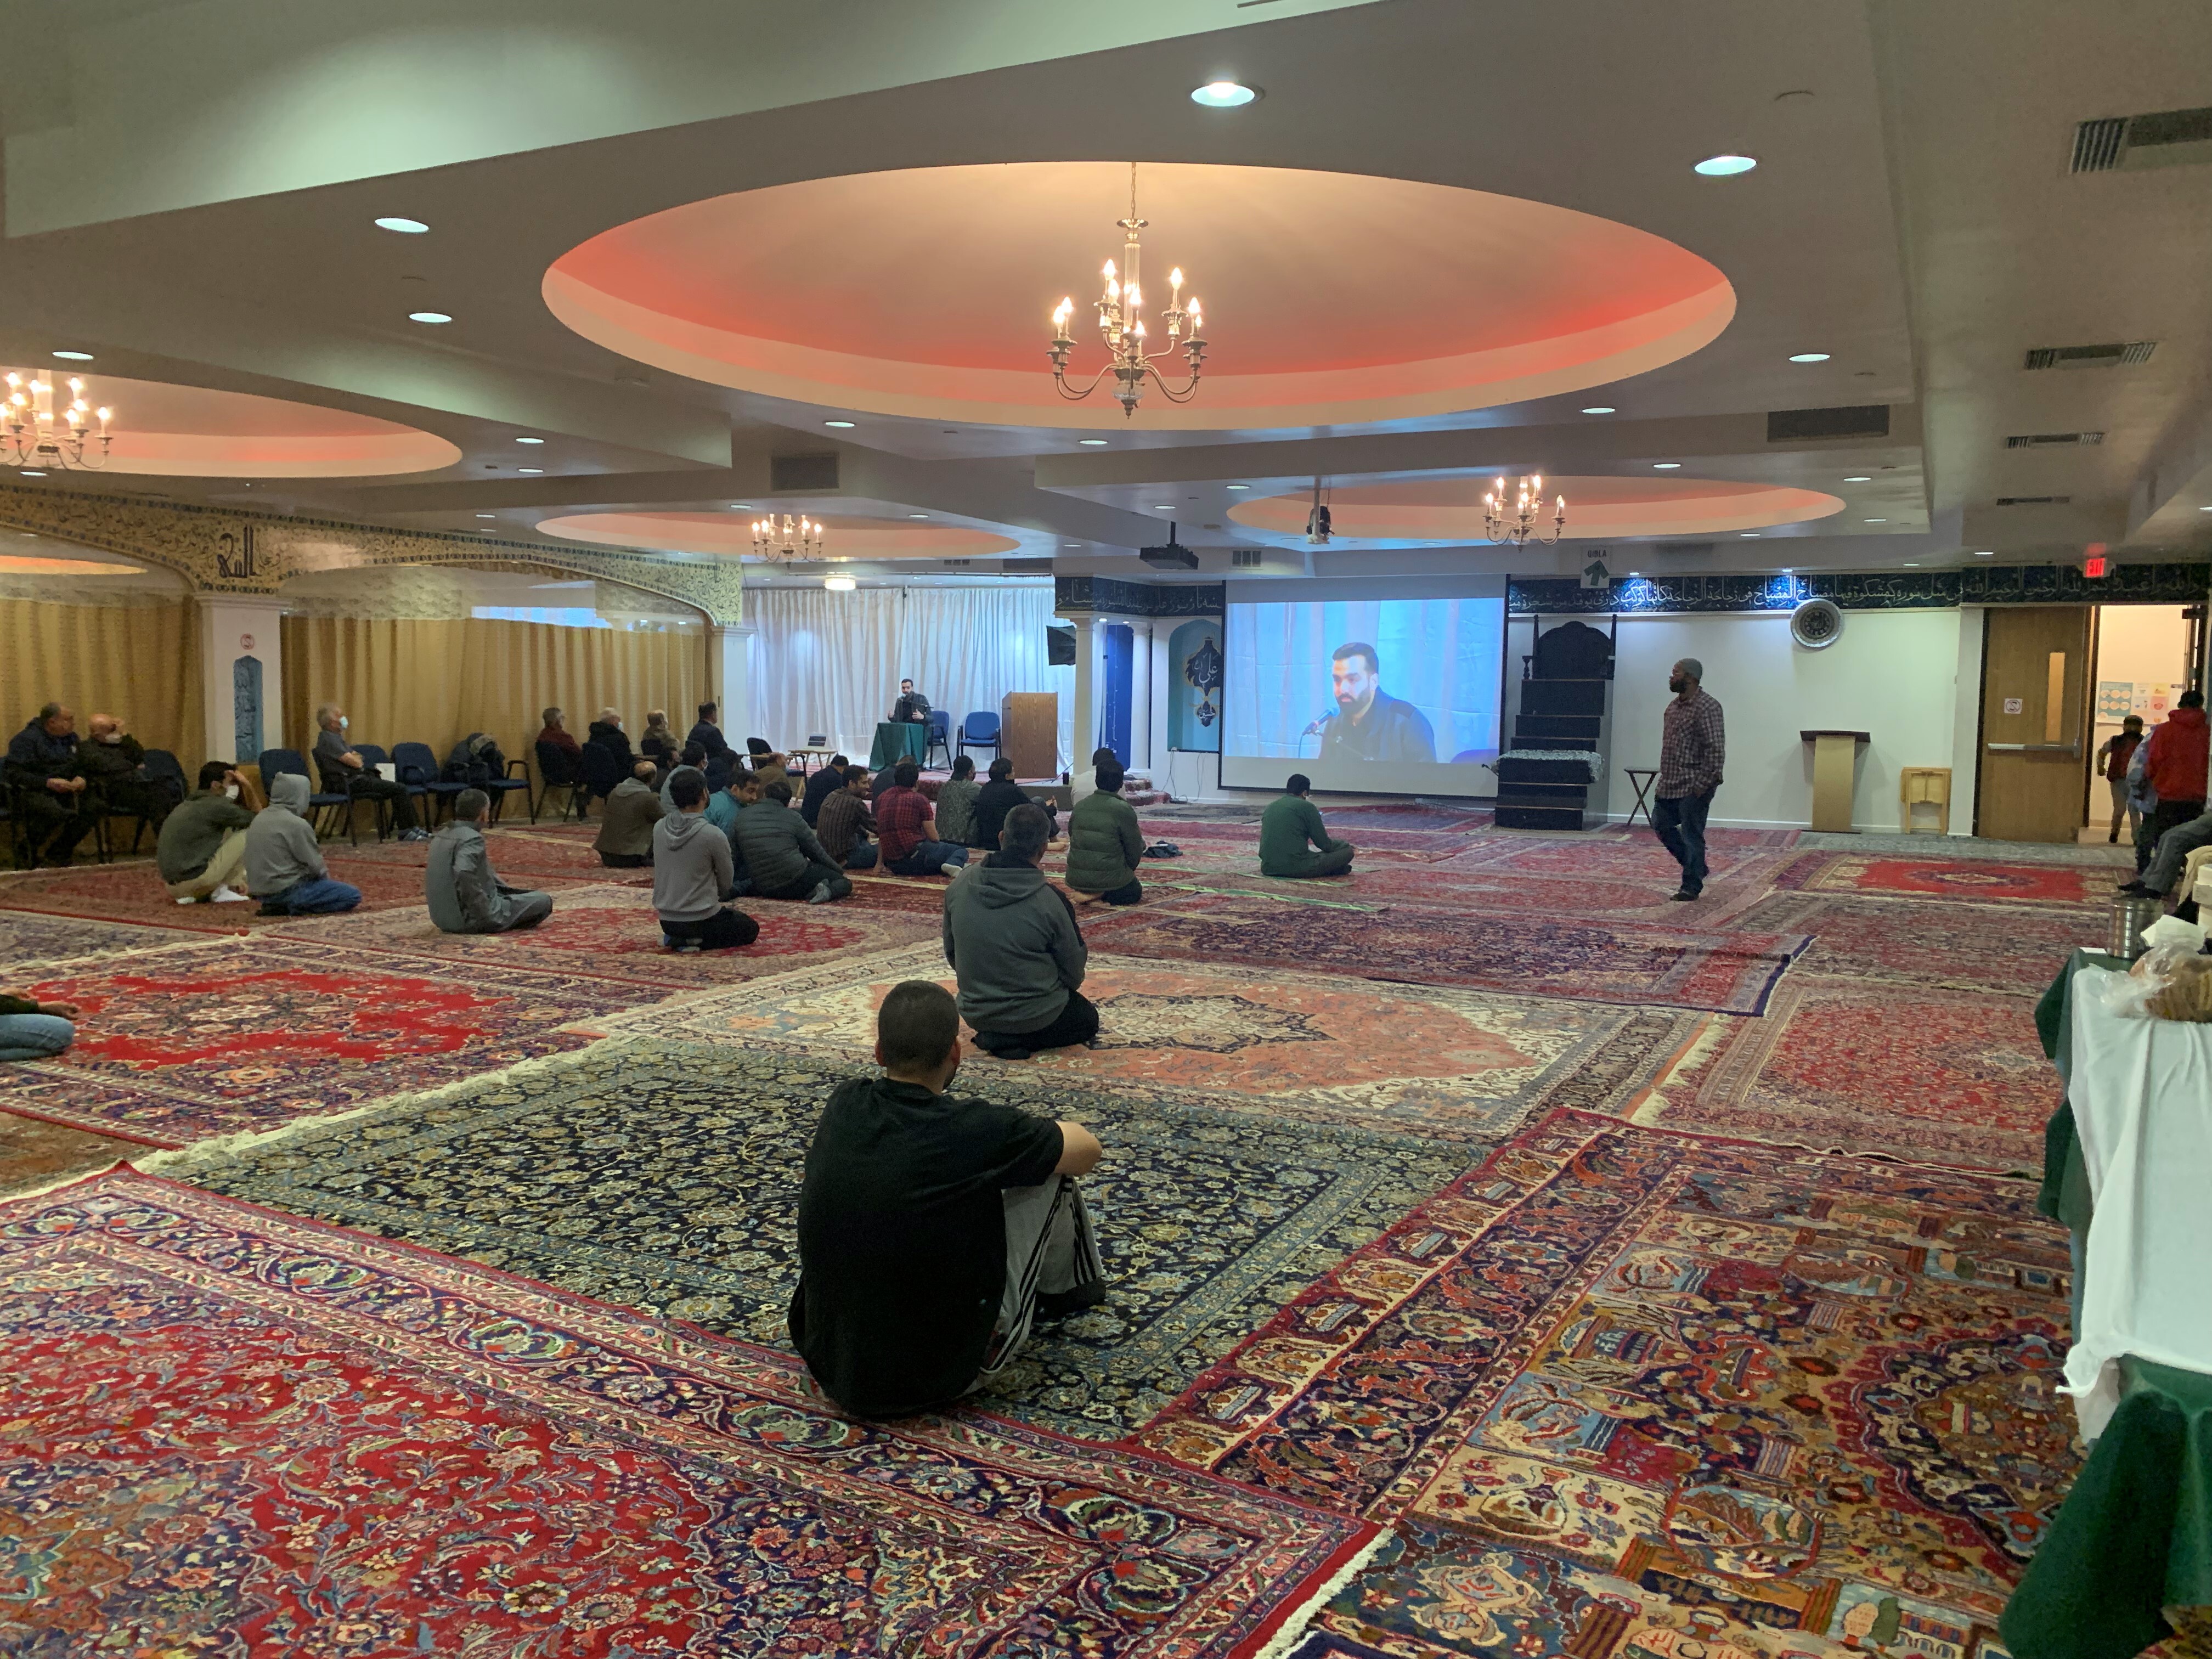 Attendees at the SABA Center are seated on the floor of the mosque listening to a speaker.